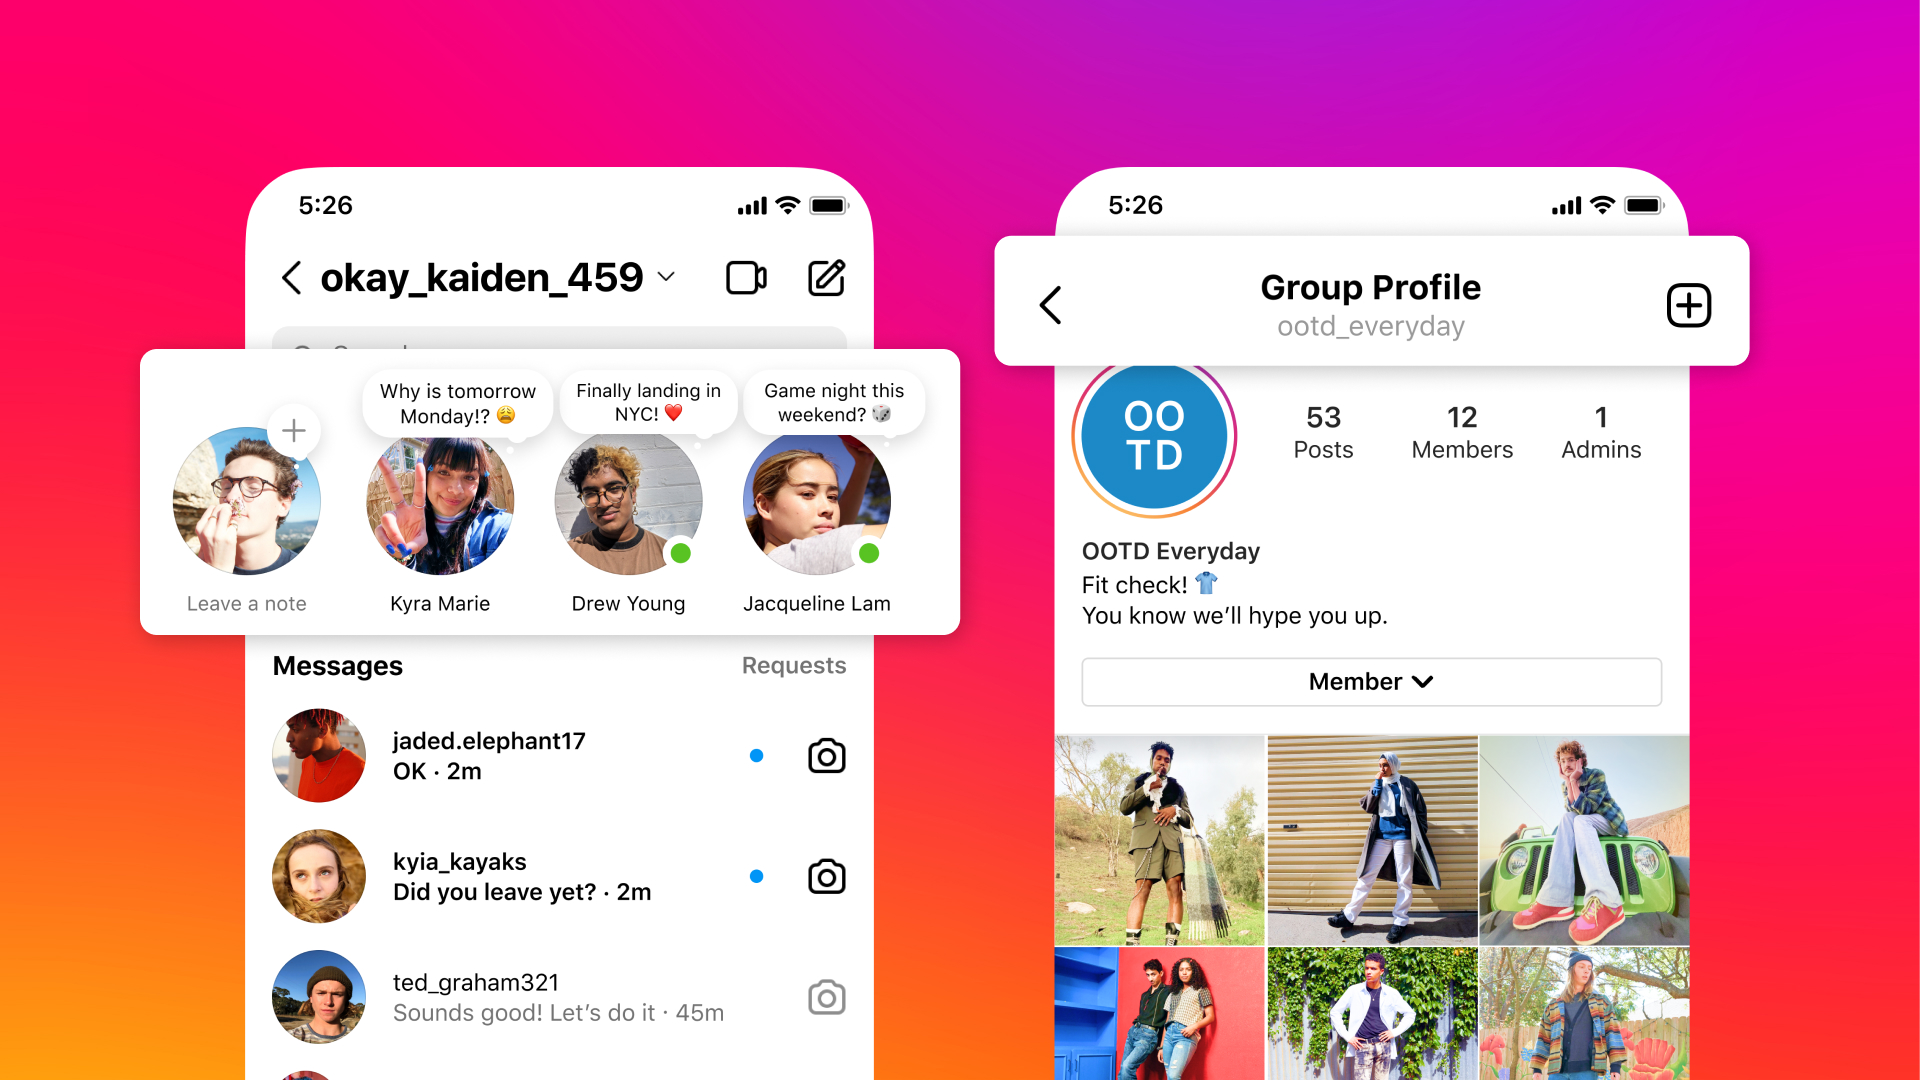 Instagram is introducing new features to help users connect with their closest followers.